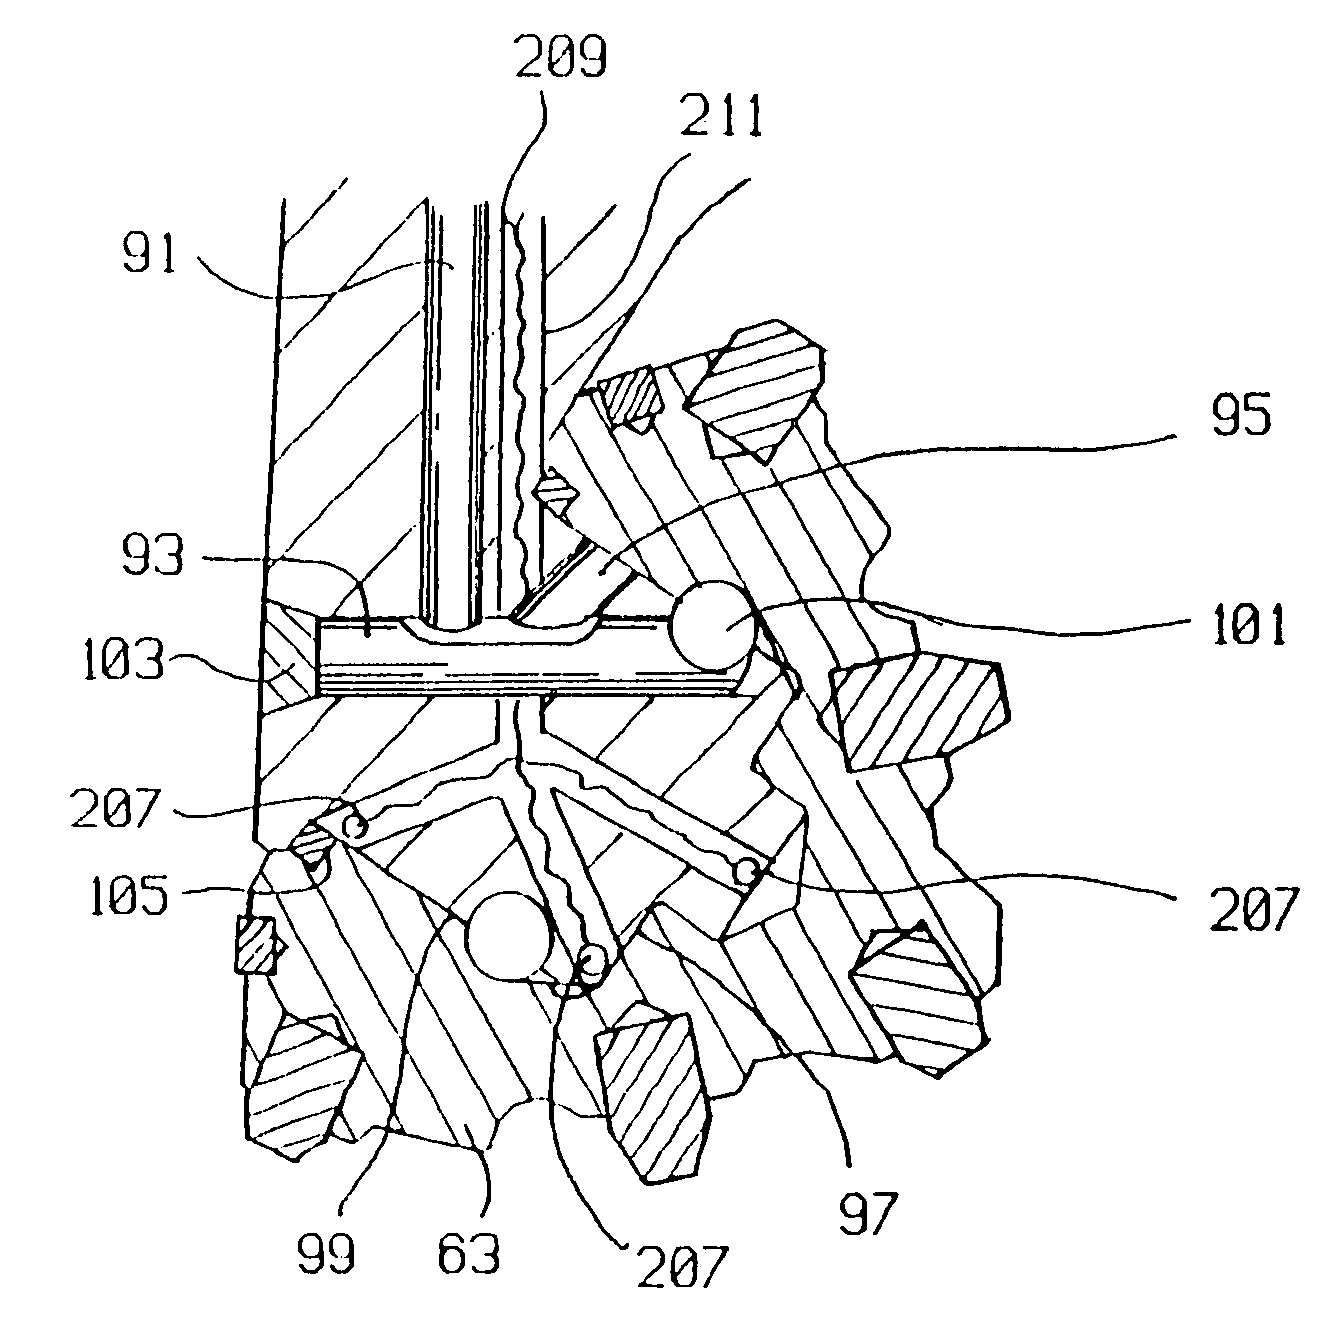 Method and apparatus for monitoring and recording of the operating condition of a downhole drill bit during drilling operations